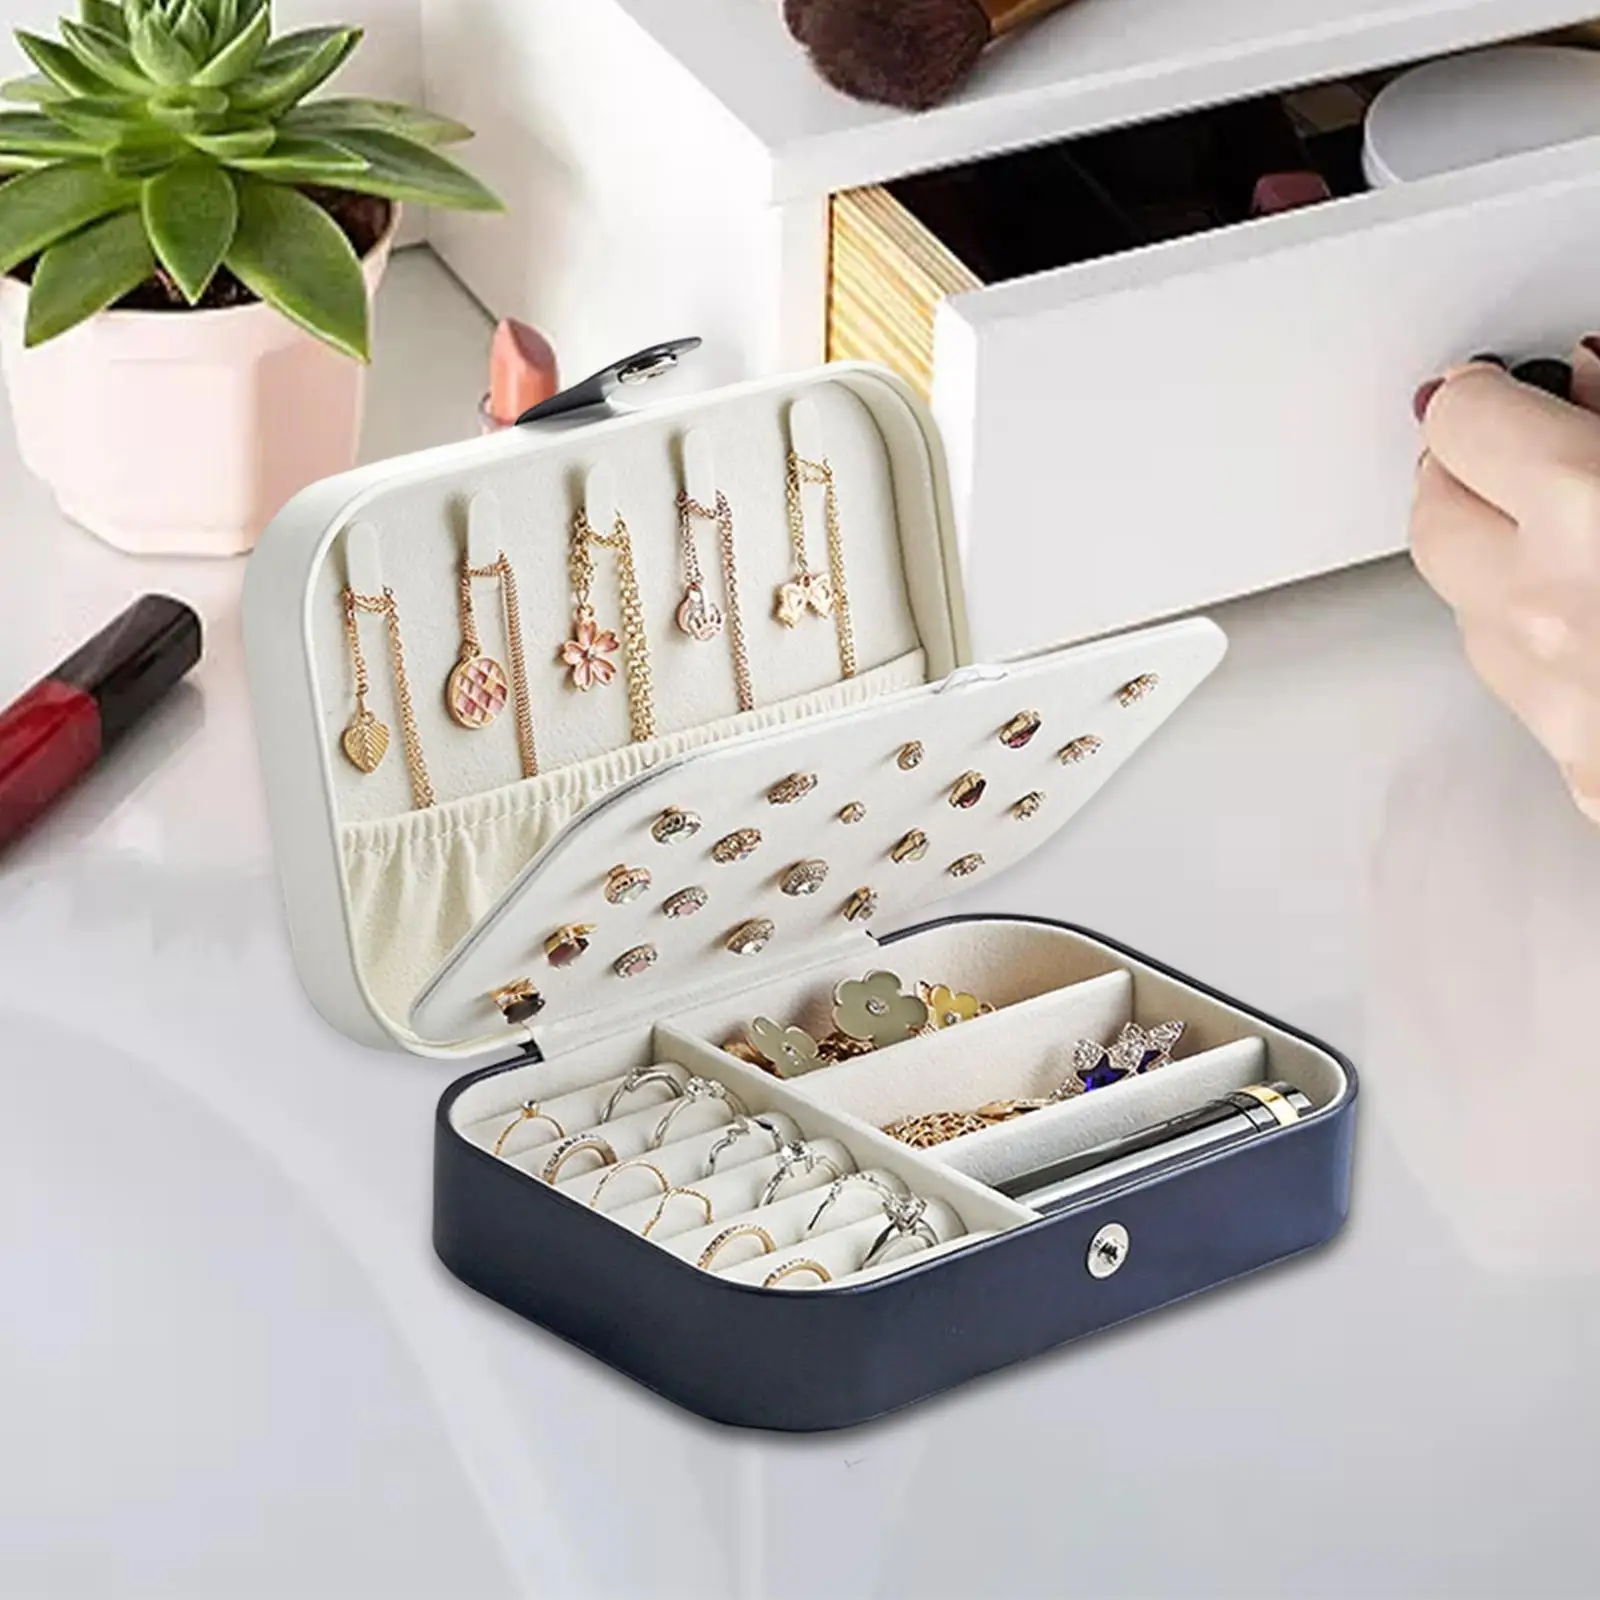 Jewelry Box Organizer PU Leather Waterproof 2 Layer Travel Holder Storage Case for Earrings Ear Studs Necklaces Bracelets Girls